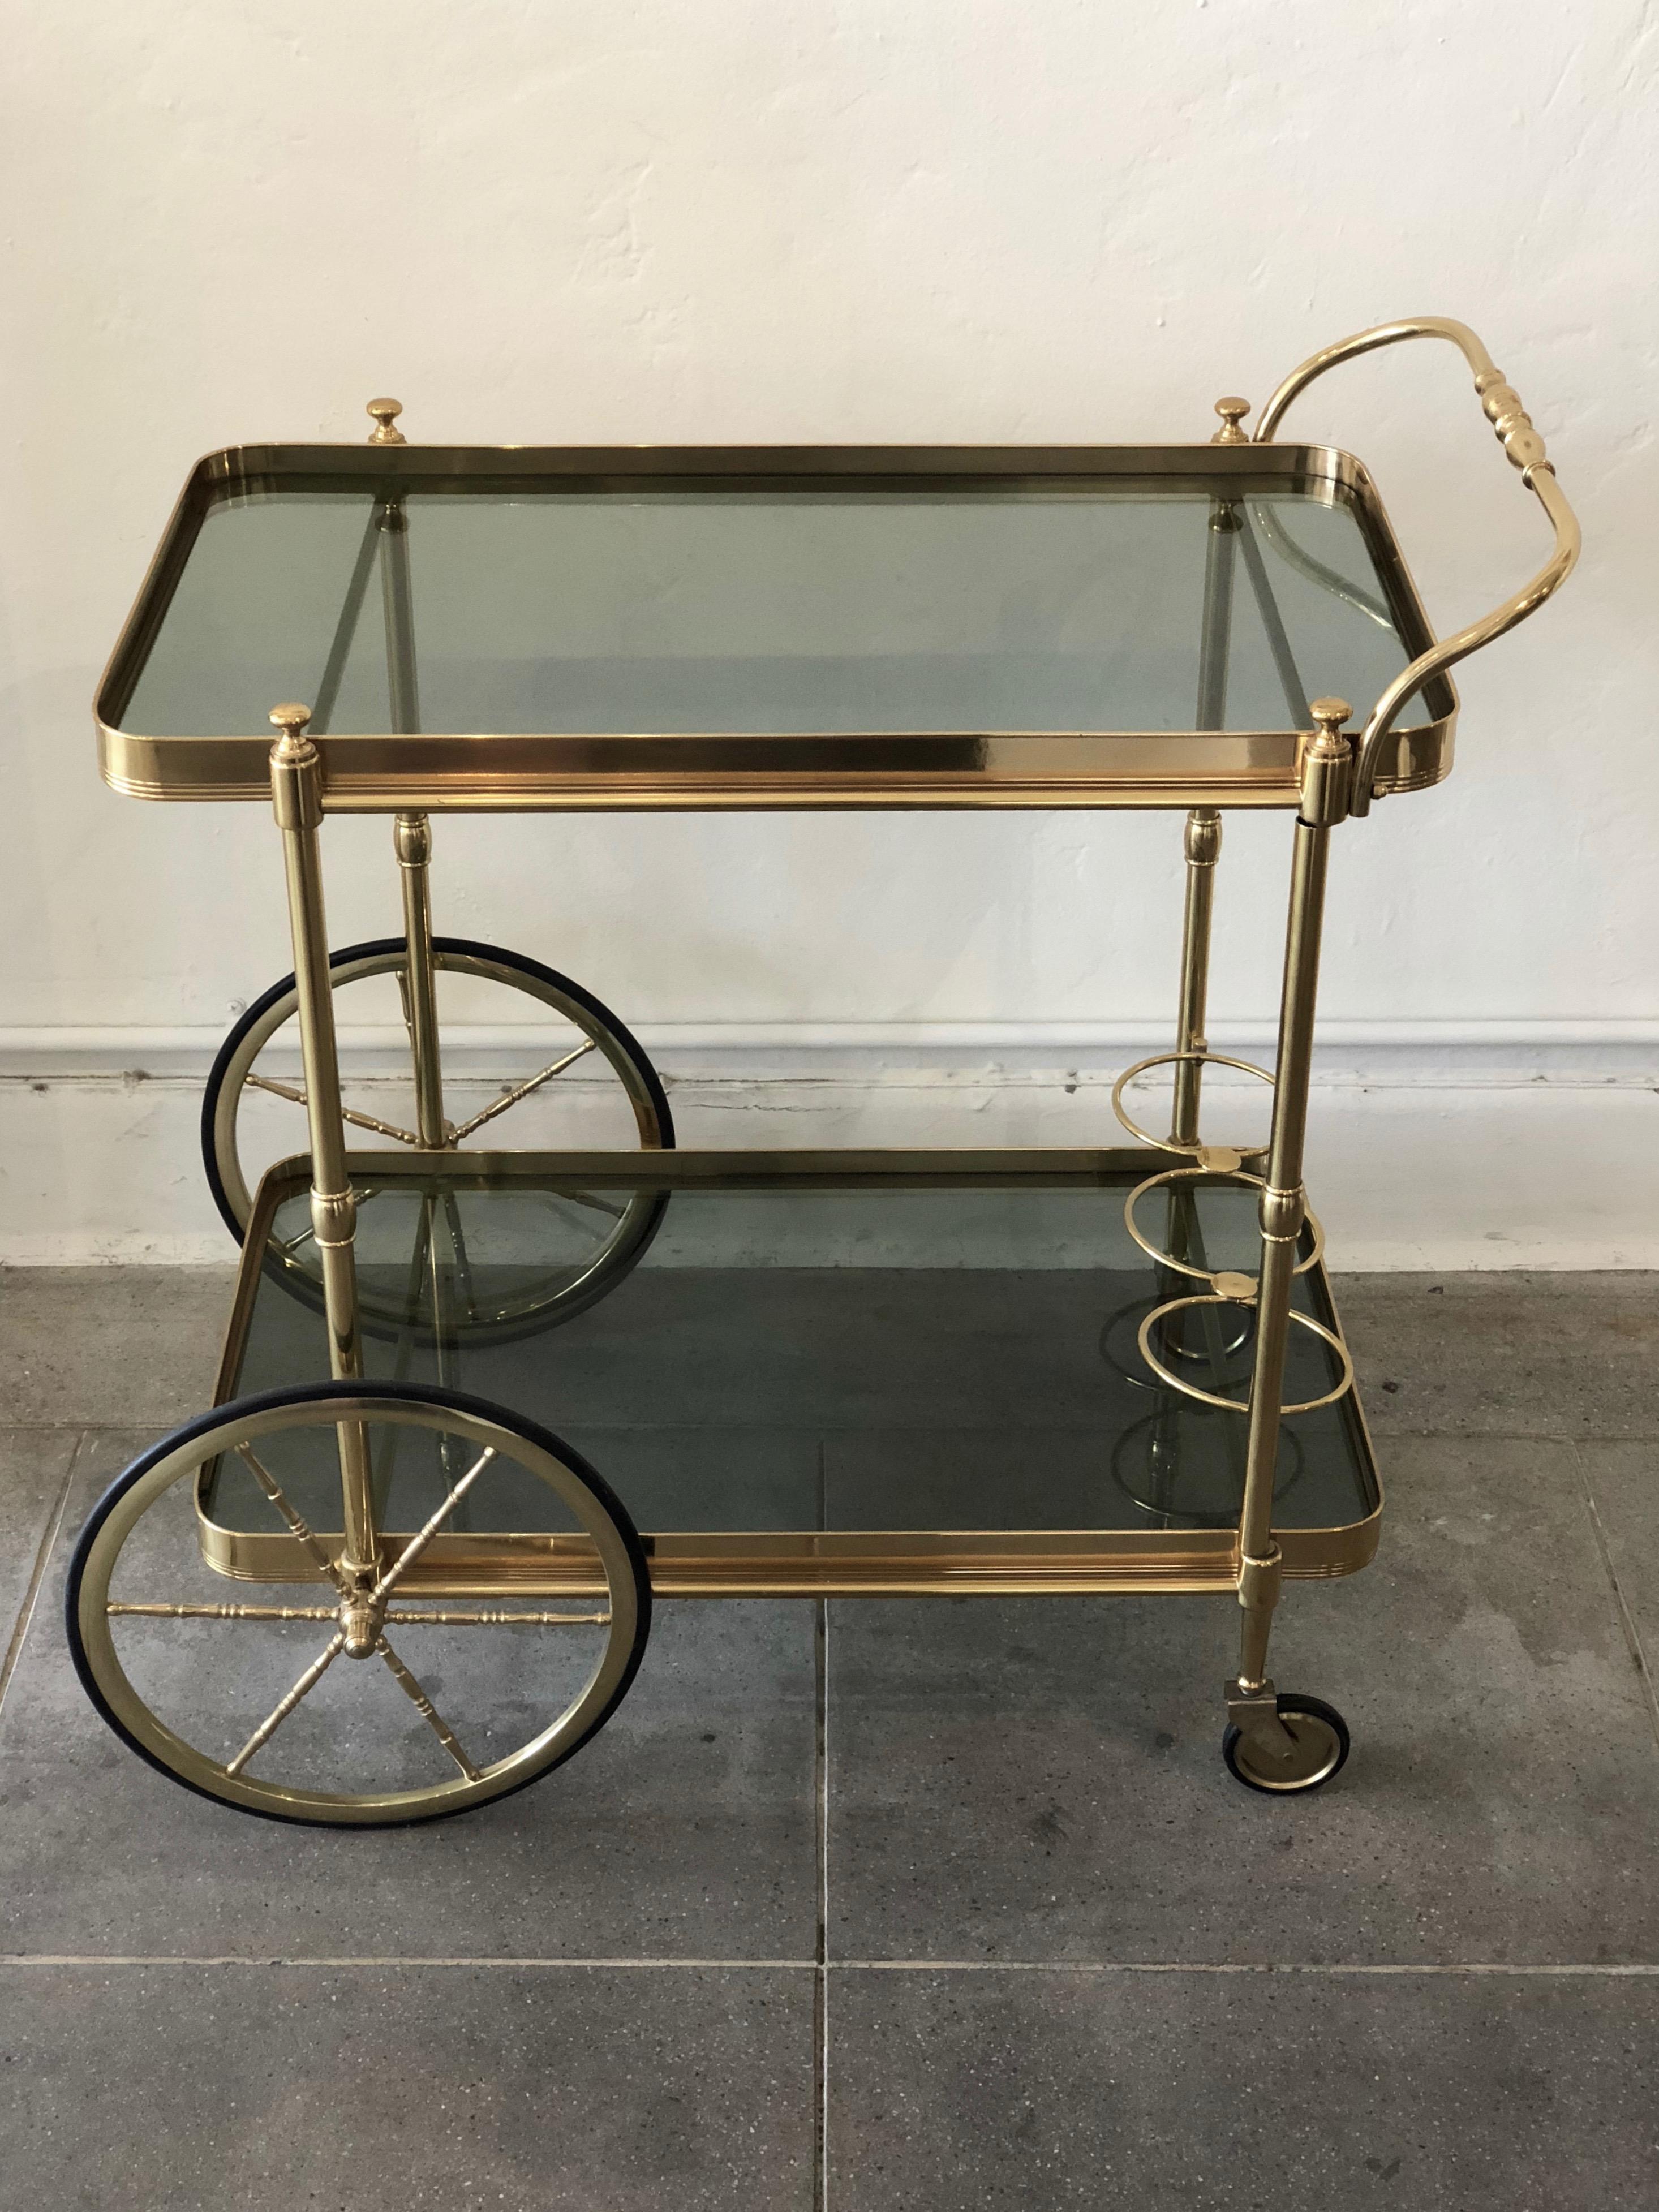 This vintage bar cart is made in Italy and has a nice medium brass tone. There are two tiers of shelving with smokey grey colored glass. The bottom shelf has three bottle spaces. The wheels and casters are in working order. 
The measurements below